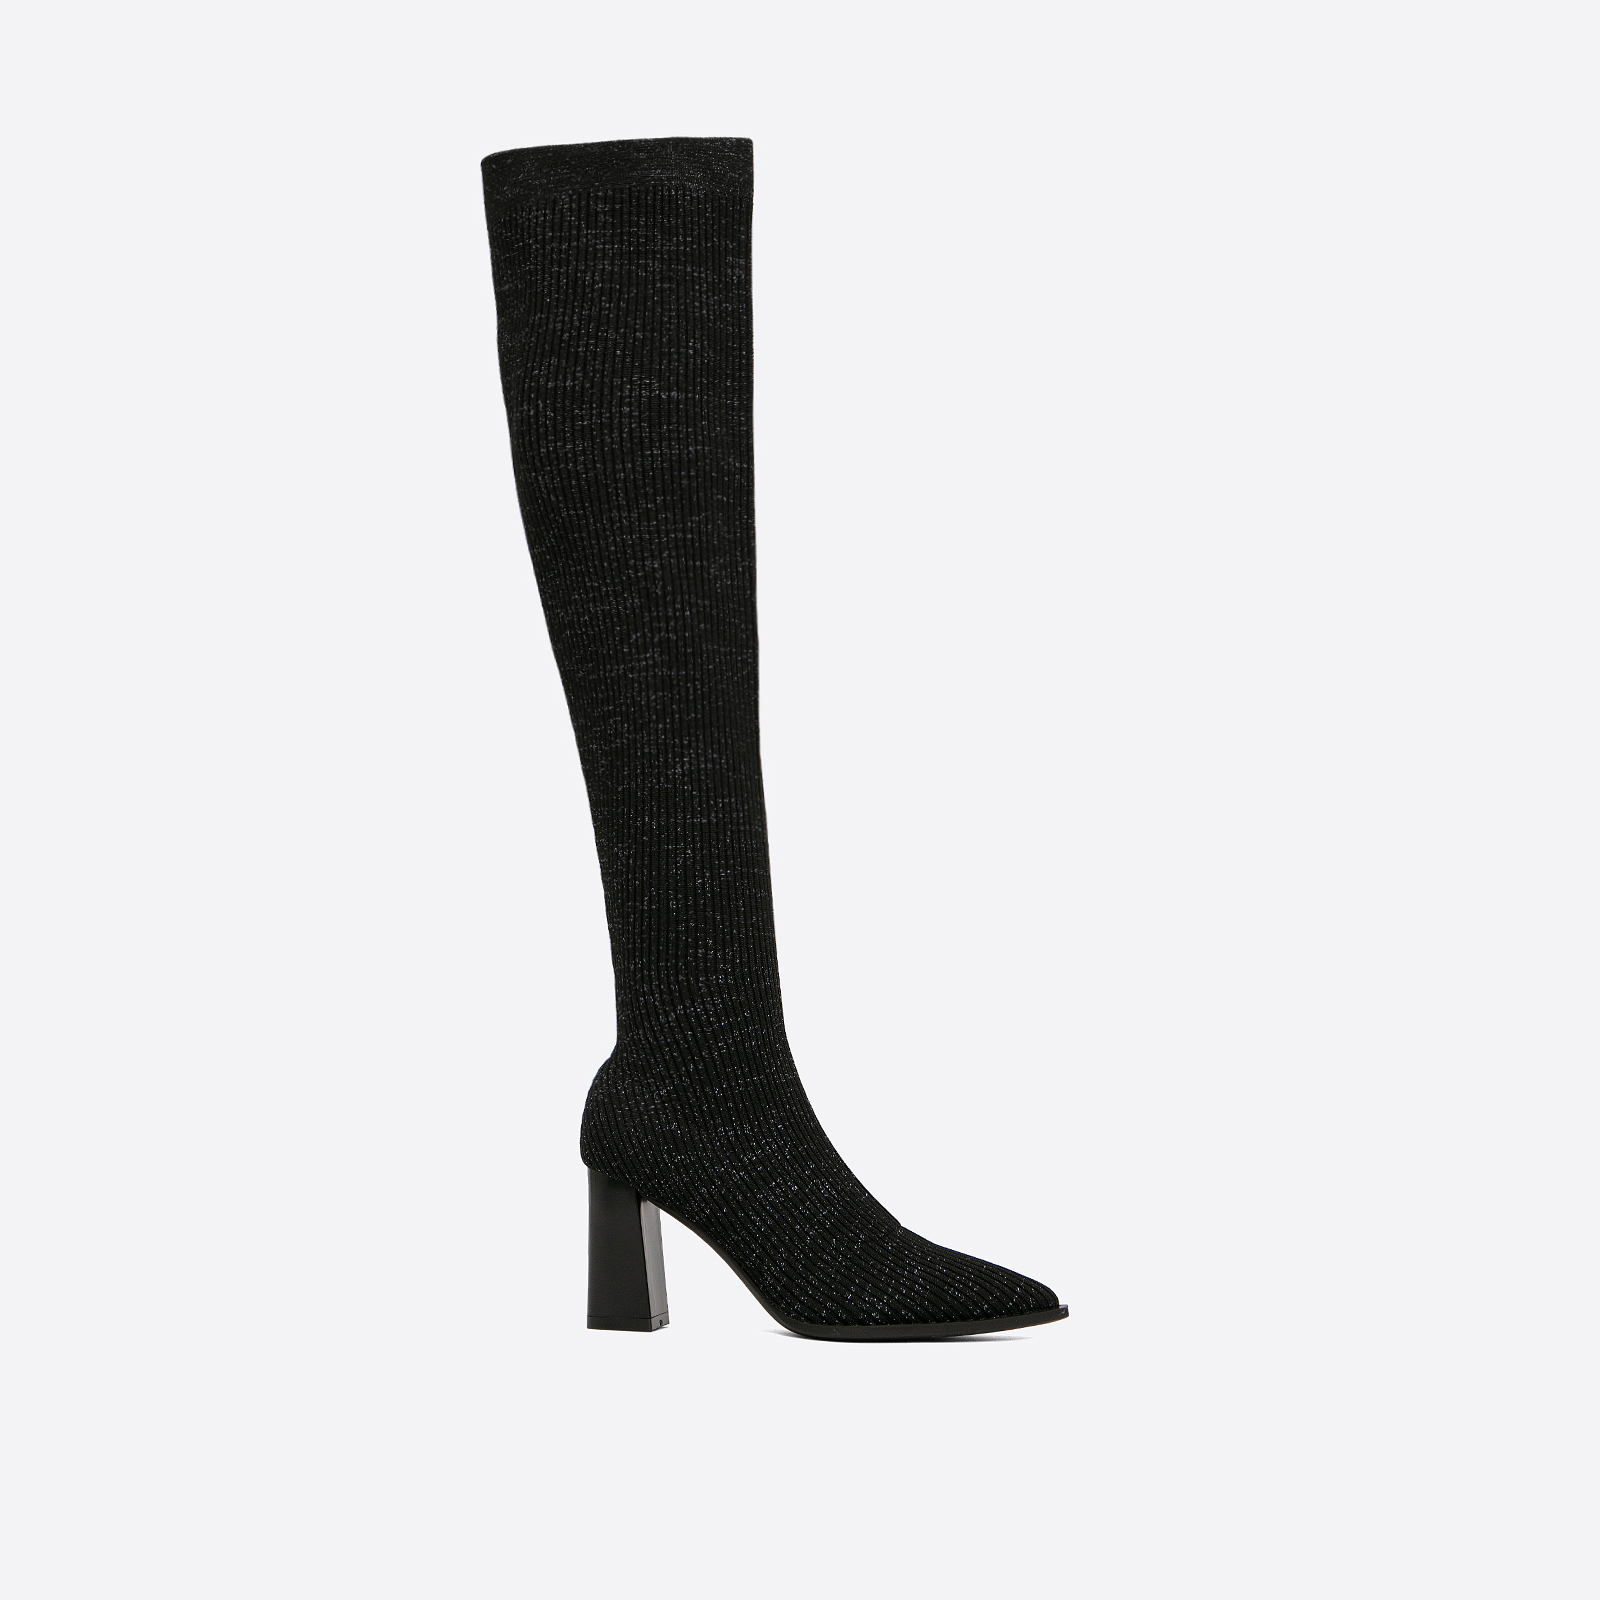 MOUSSE FIT Women Knit Comfort Chunky Over Knee Boots